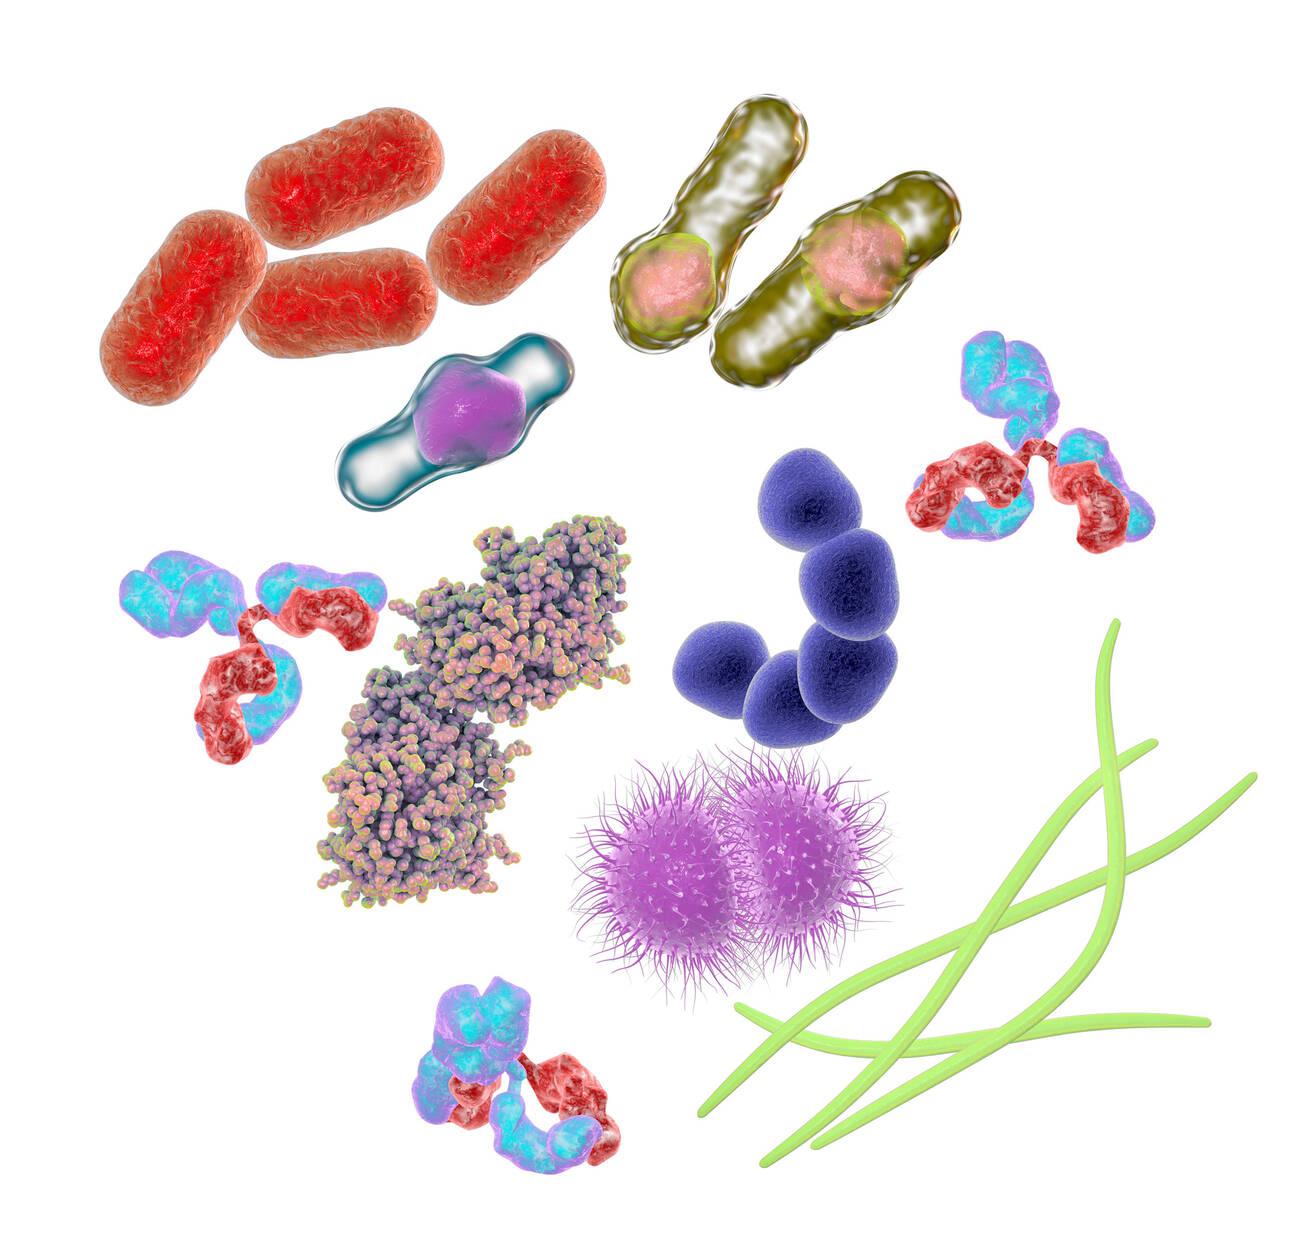 Microbes and molecules of different shapes and sizes